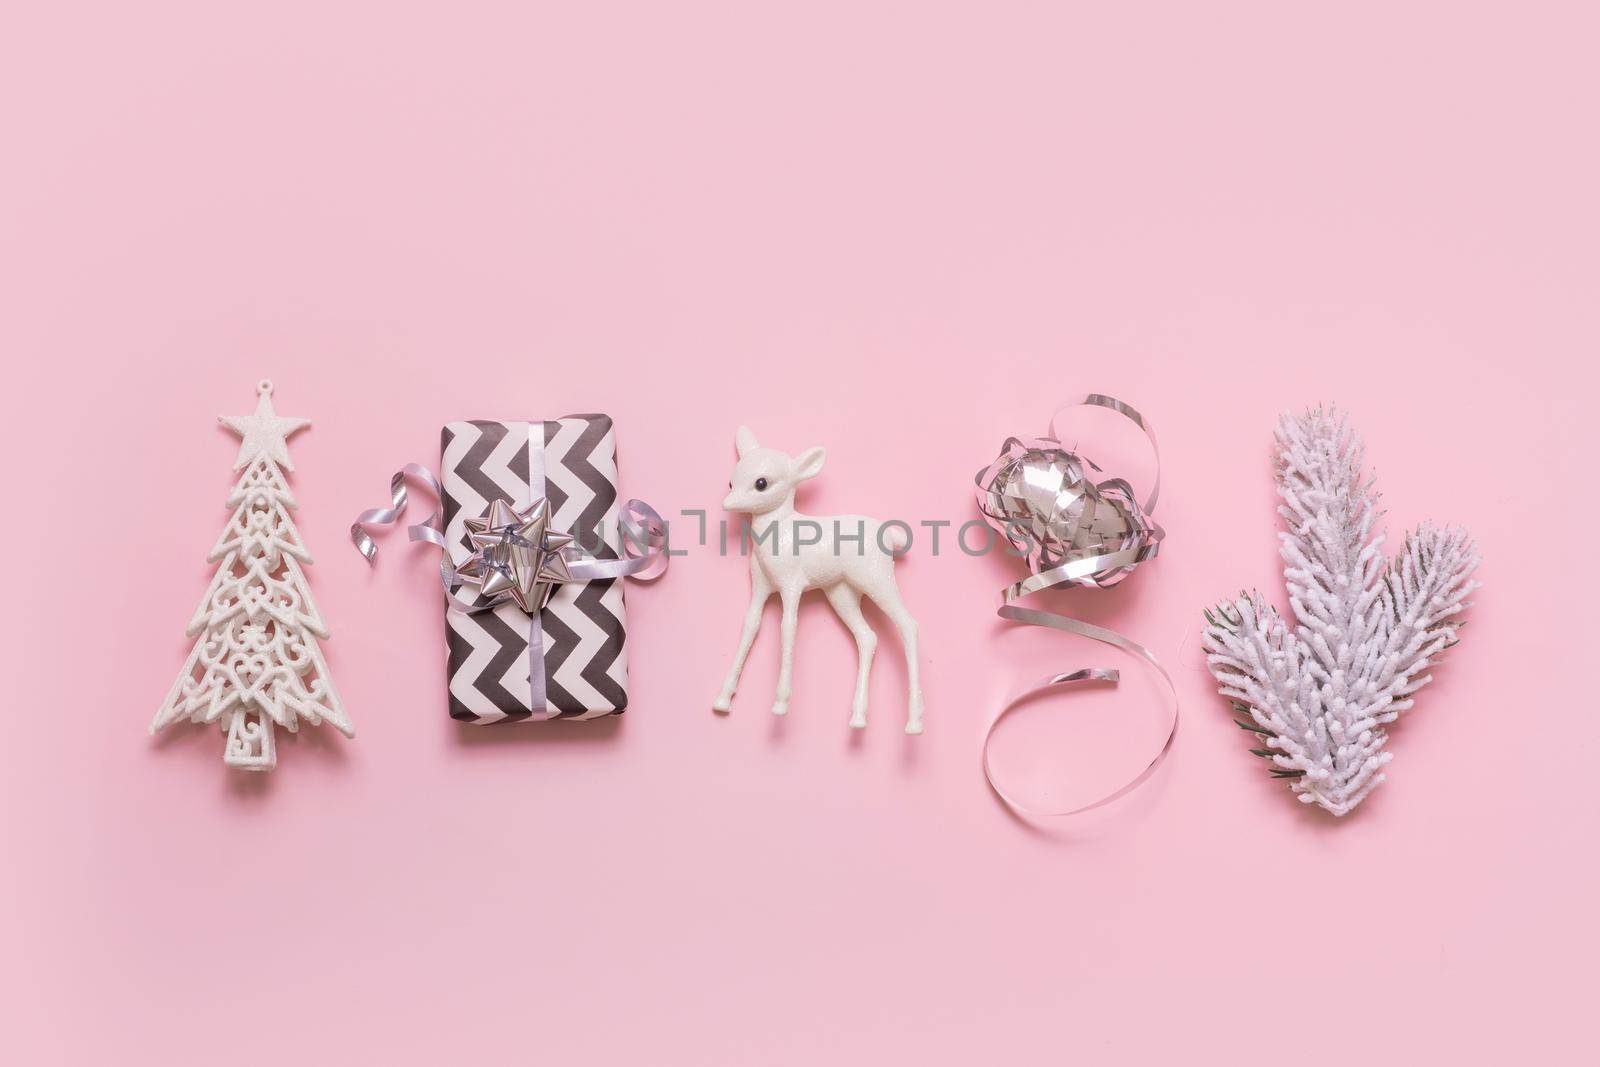 Festive minimal creative christmas composition with gift, deer, xmas tree flat lay on pink background.